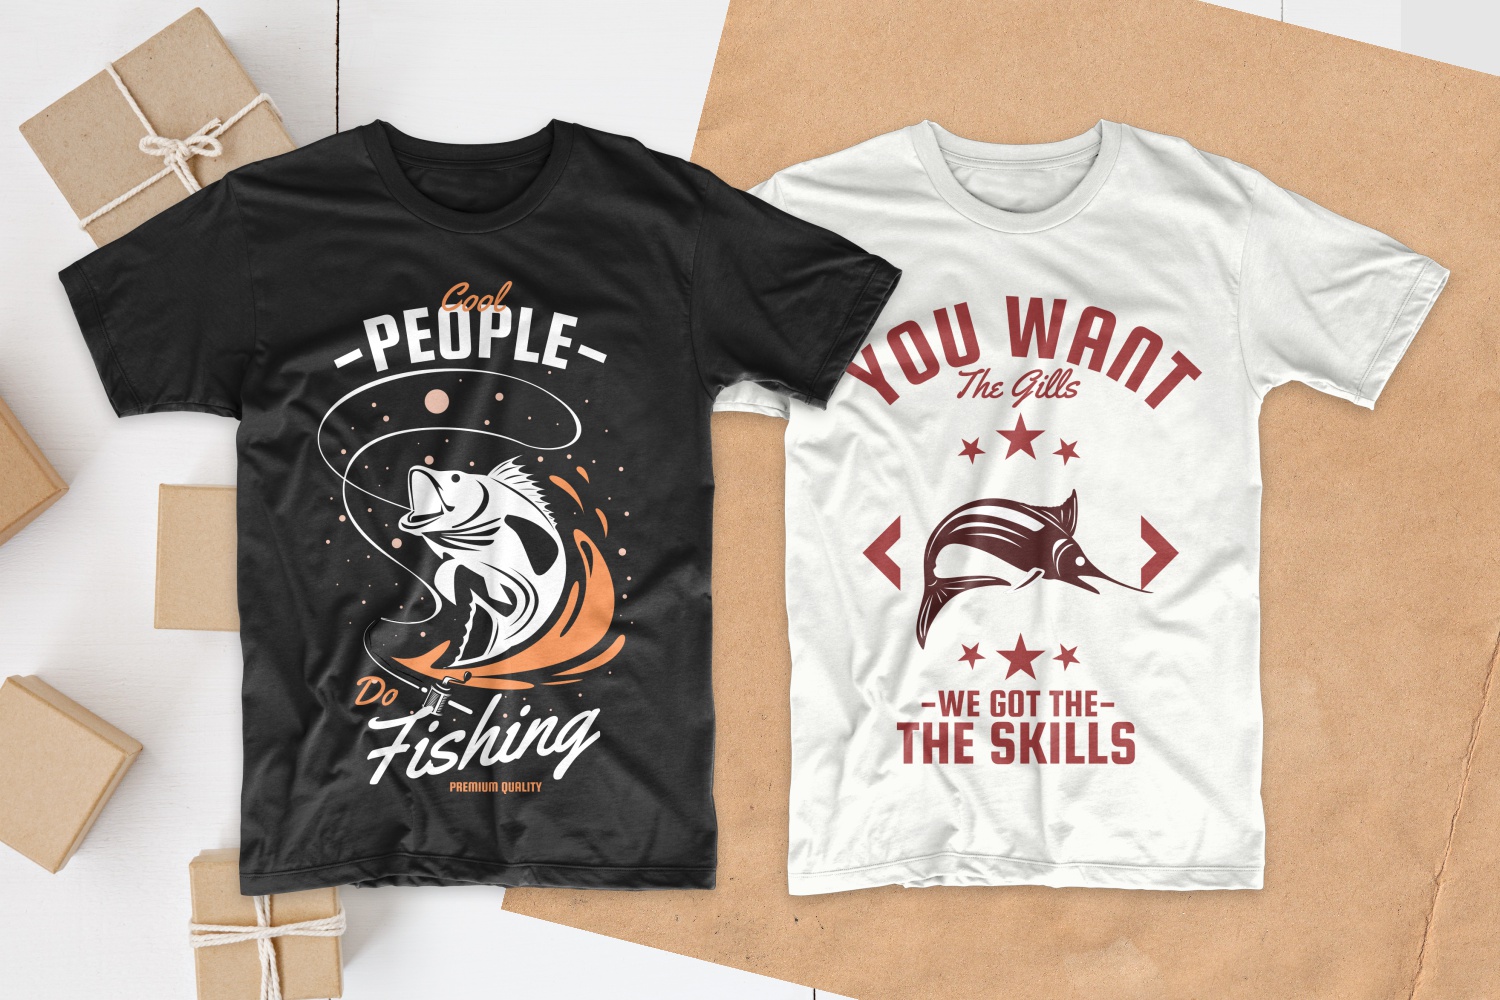 Black and white T-shirts with motivational phrases about fishing.